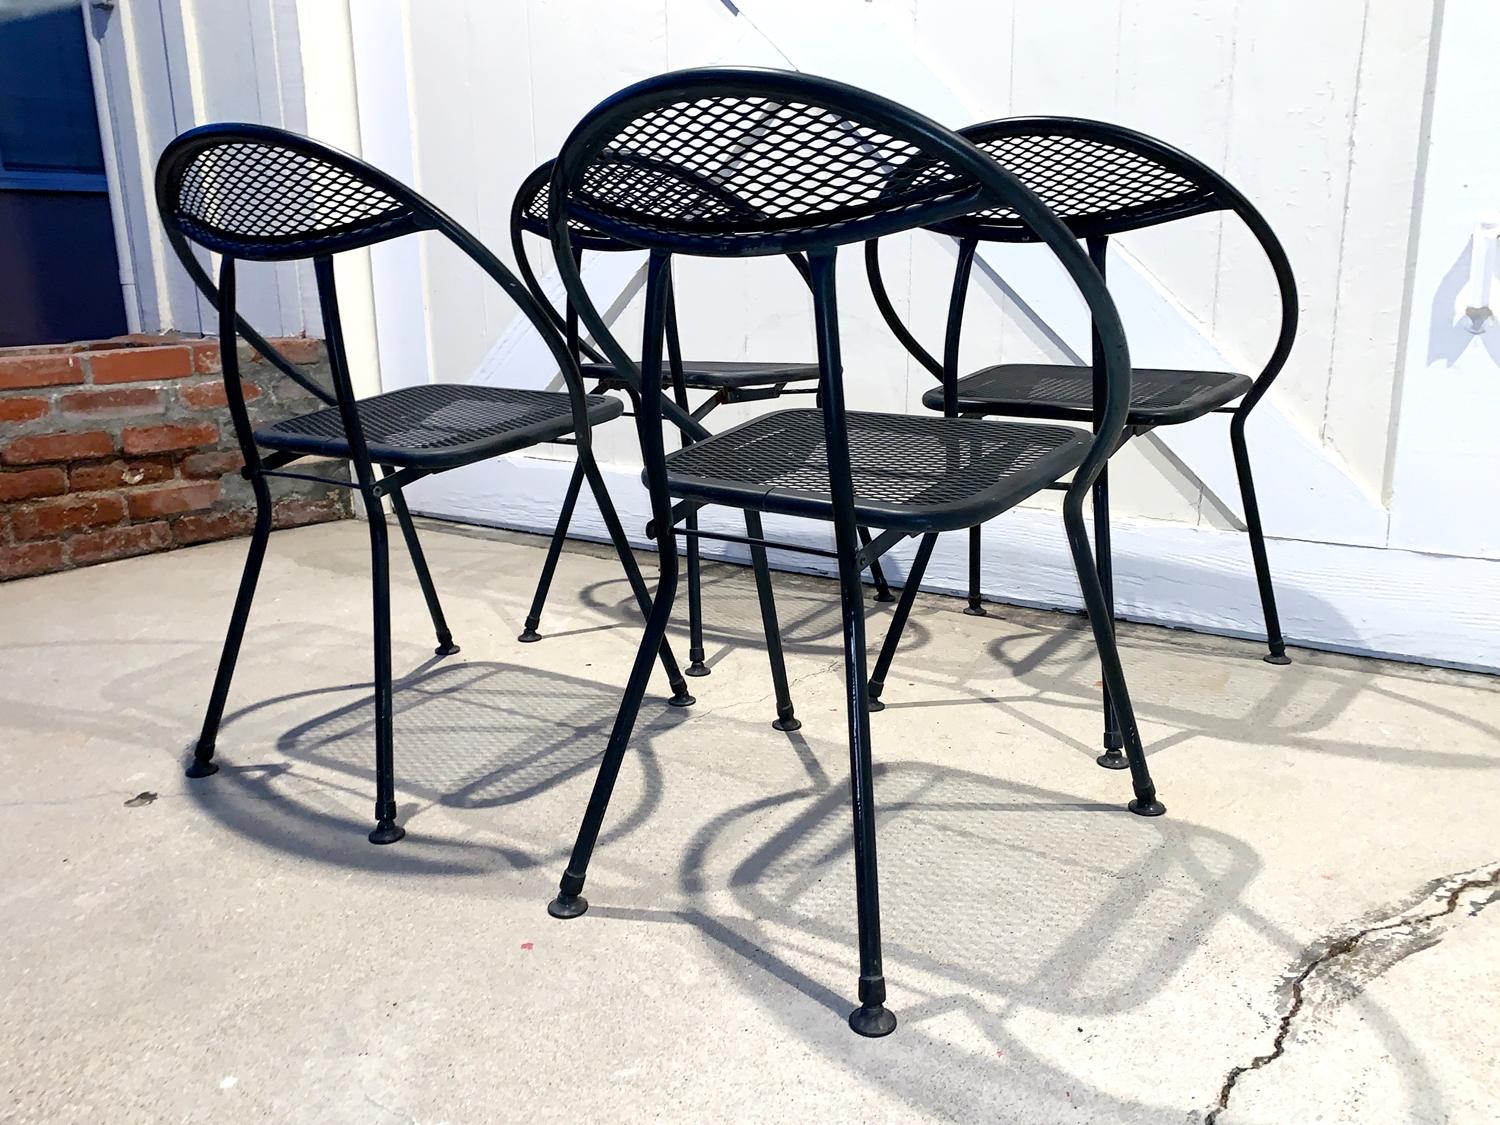 Mid-Century Modern Set of 4 Folding Chairs by Salterini for Rid-Jid